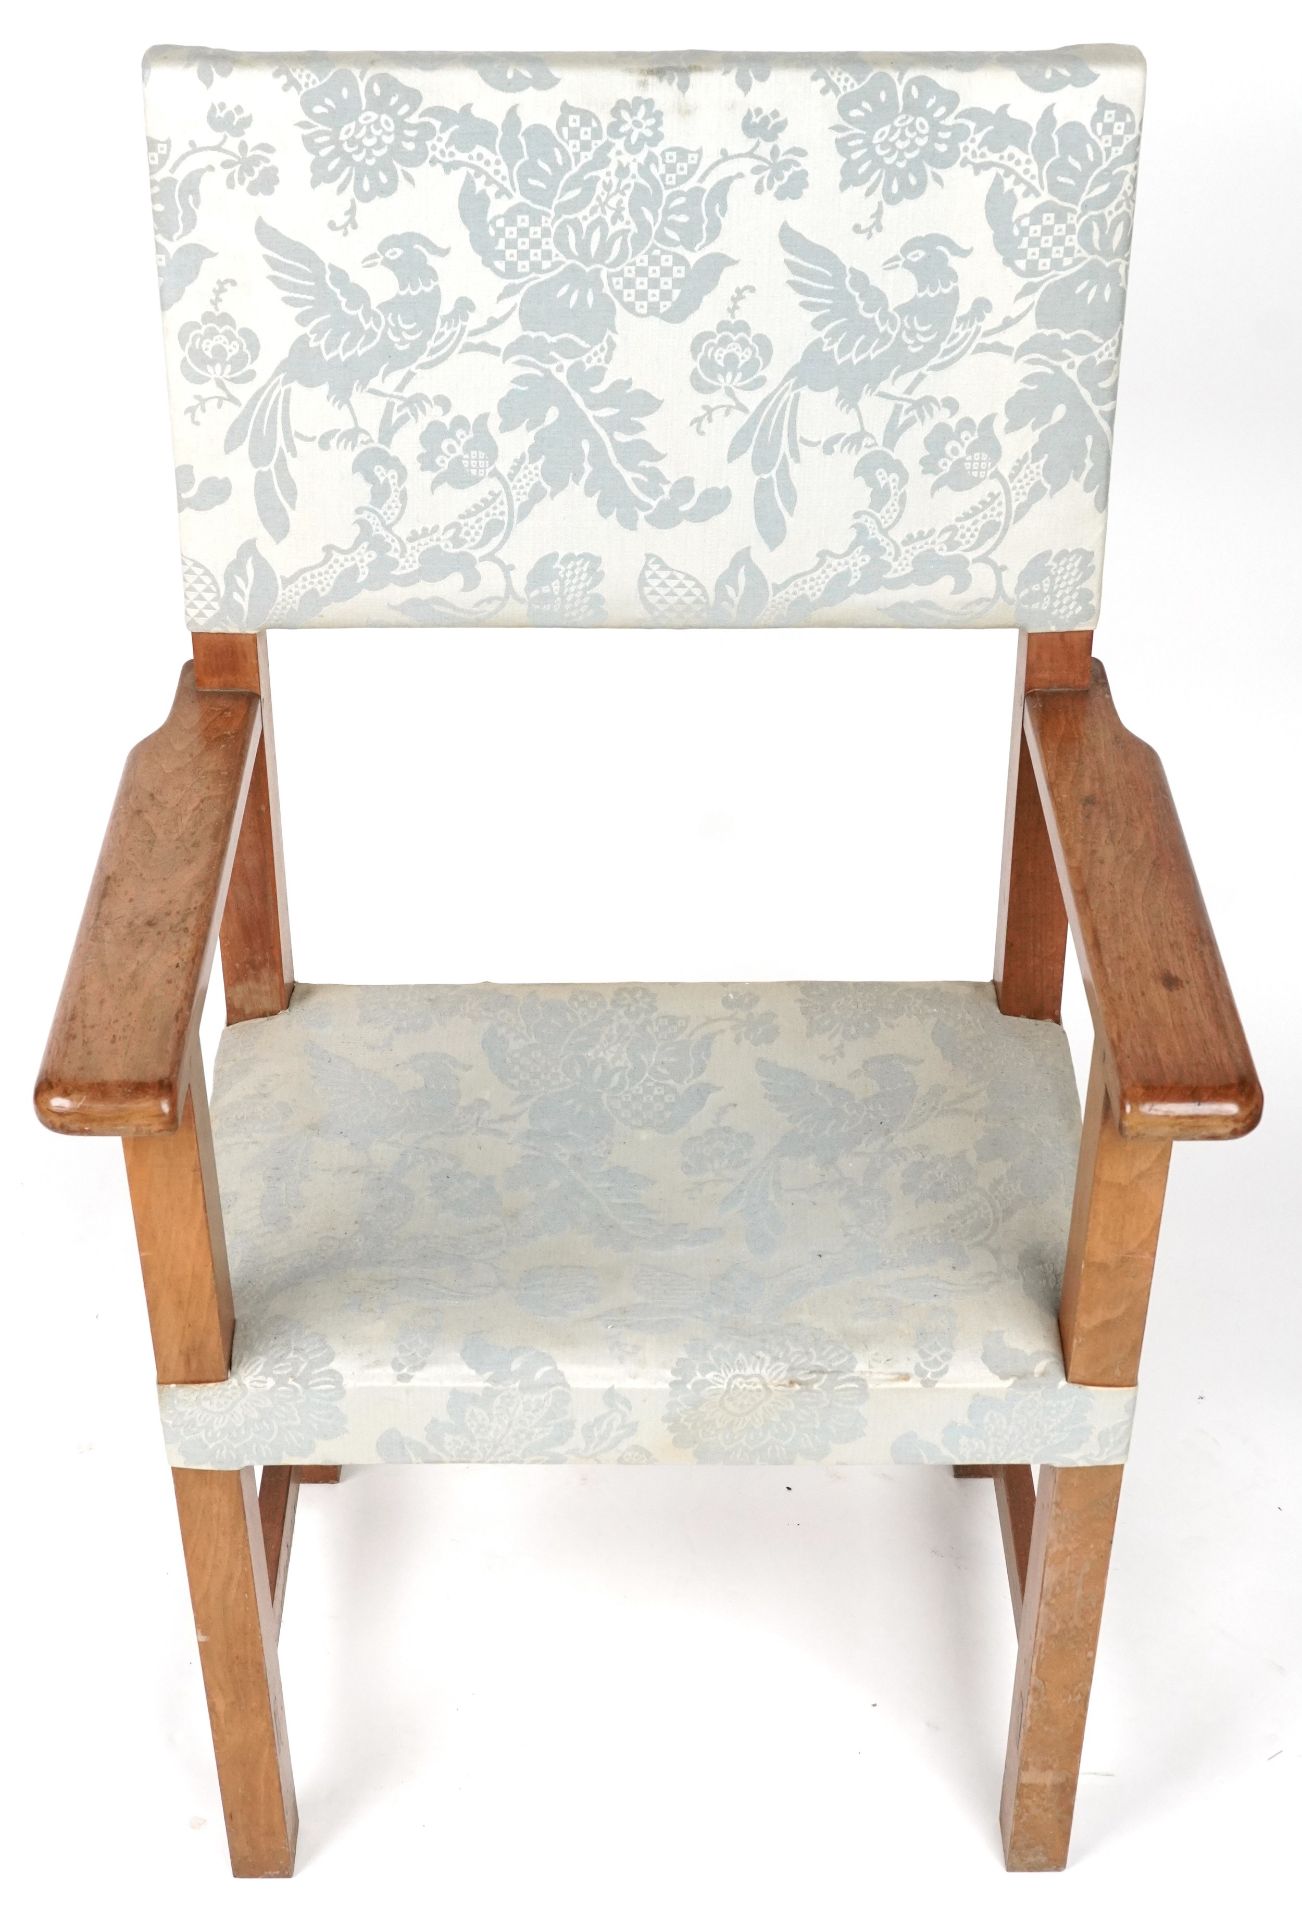 Arts & Crafts lightwood framed open armchair with bird of paradise upholstery, 118cm high - Image 3 of 4